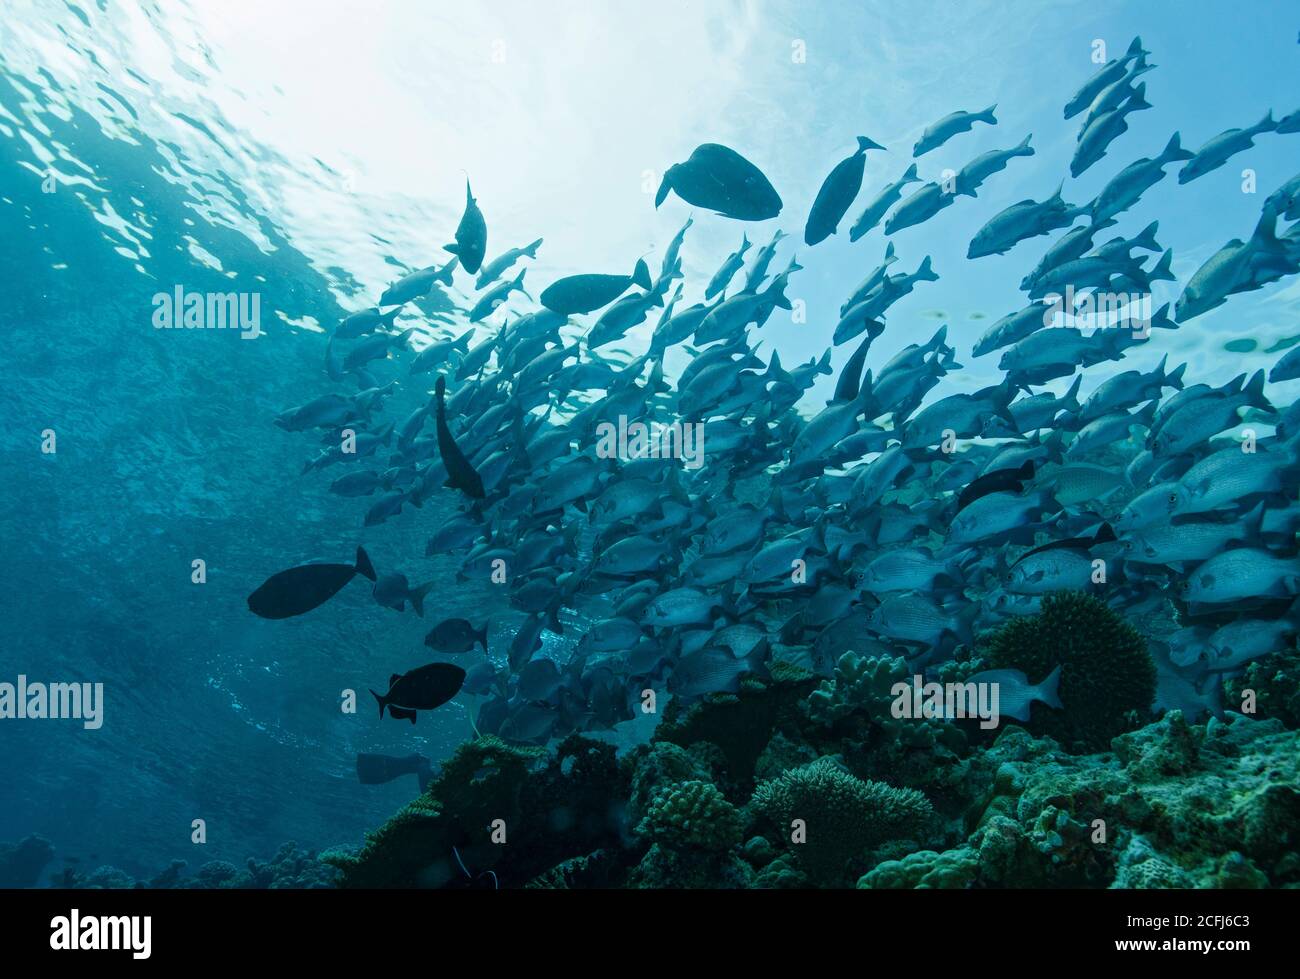 Shoal of Snubnose rudderfish, Kyphosus cinerascens, on top of coral reef, Maldives, Indian Ocean Stock Photo